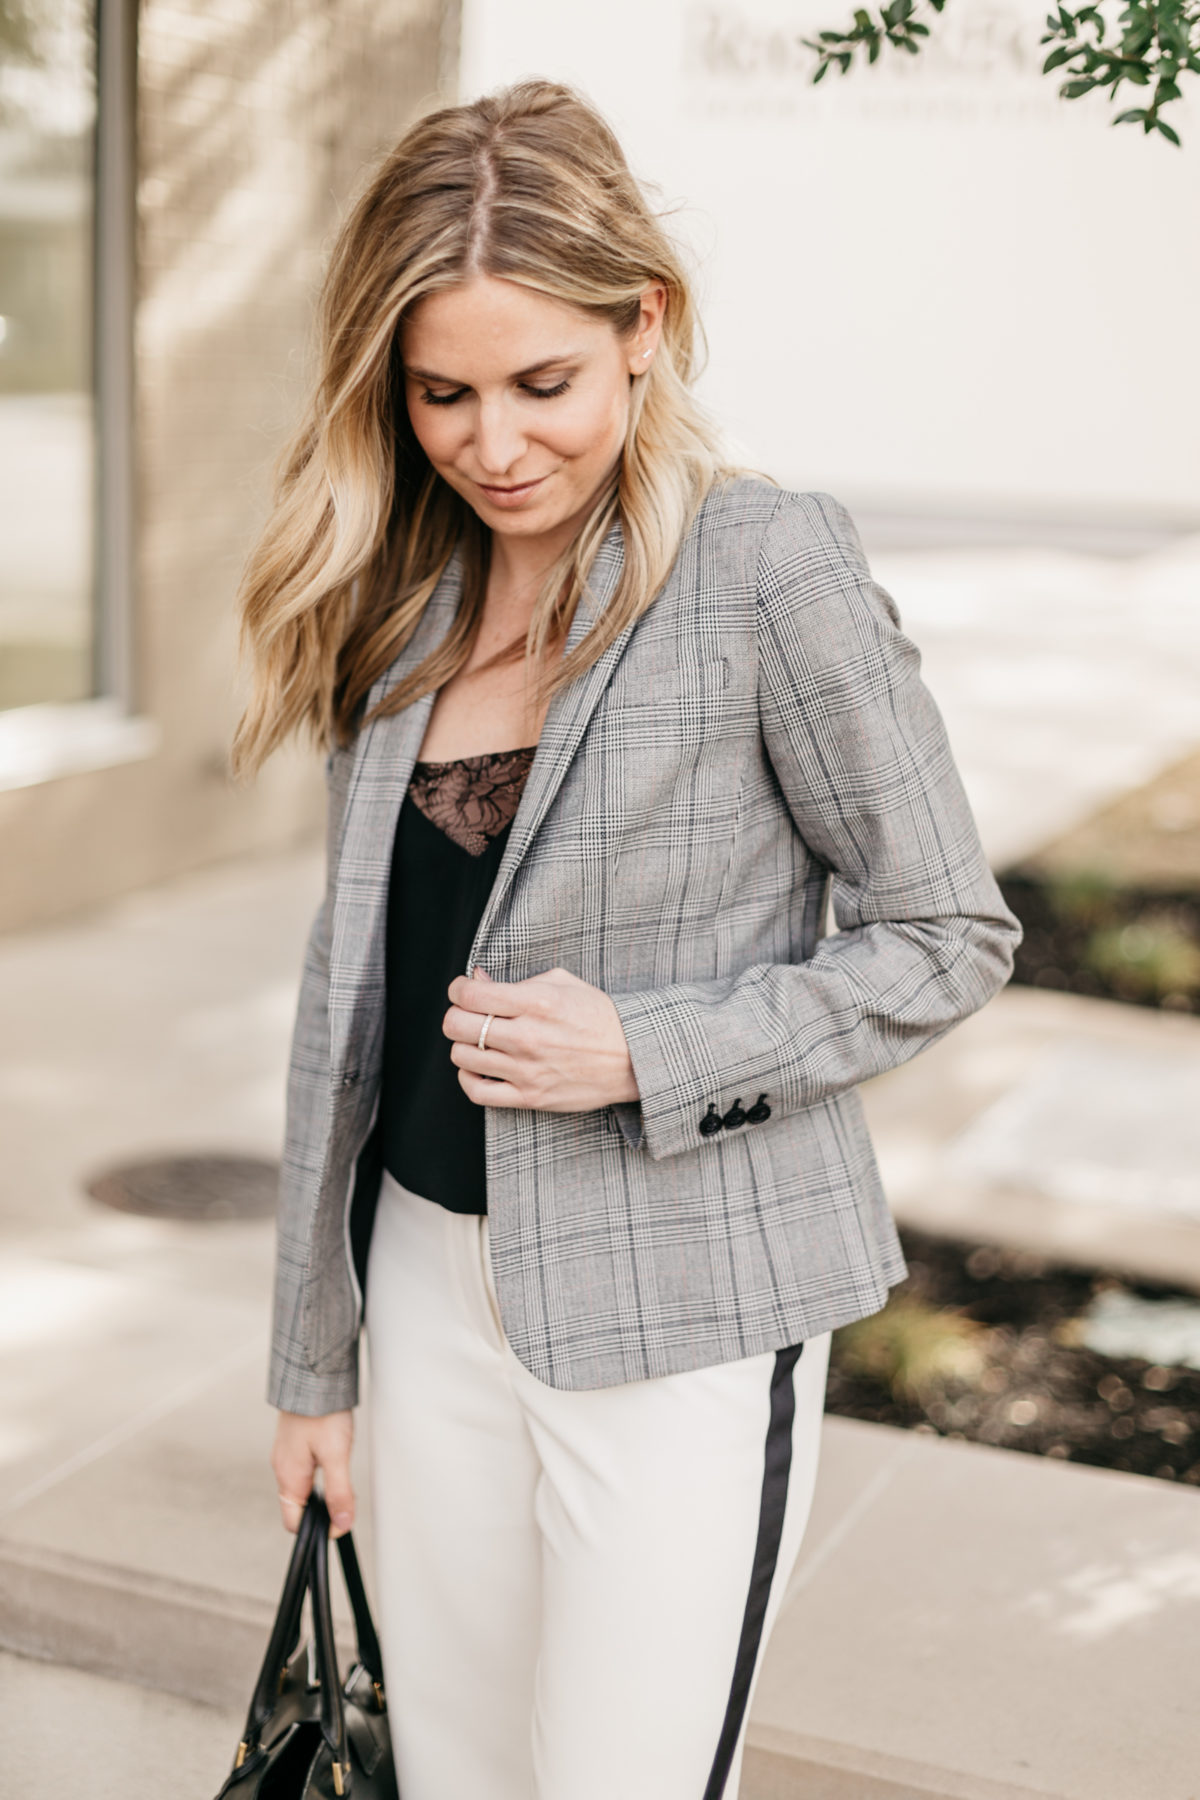 OUTFIT 1  White with Black Stripe Pants // Black Lace Camisole // Grey Plaid Fitted Blazer // Black Work Bag